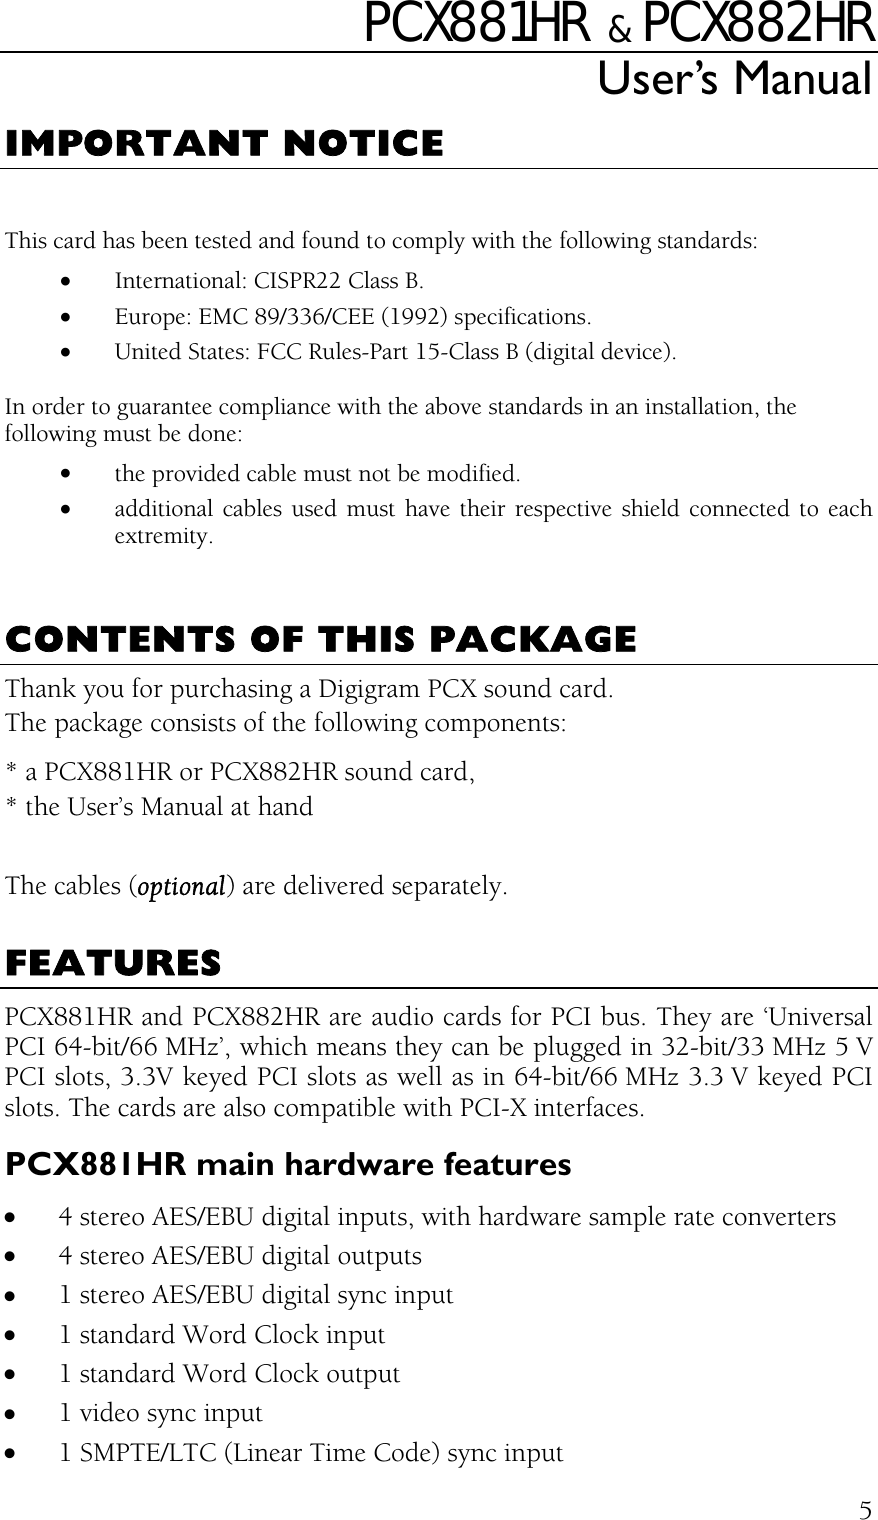 PCX881HR   &amp;  PCX882HR User’s Manual  5IMPORTANT NOTICE  This card has been tested and found to comply with the following standards: •  International: CISPR22 Class B. •  Europe: EMC 89/336/CEE (1992) specifications. •  United States: FCC Rules-Part 15-Class B (digital device). In order to guarantee compliance with the above standards in an installation, the following must be done: •  the provided cable must not be modified. •  additional cables used must have their respective shield connected to each extremity.   CONTENTS OF THIS PACKAGE Thank you for purchasing a Digigram PCX sound card. The package consists of the following components: * a PCX881HR or PCX882HR sound card, * the User’s Manual at hand  The cables (optional) are delivered separately.  FEATURES PCX881HR and PCX882HR are audio cards for PCI bus. They are ‘Universal PCI 64-bit/66 MHz’, which means they can be plugged in 32-bit/33 MHz 5 V PCI slots, 3.3V keyed PCI slots as well as in 64-bit/66 MHz 3.3 V keyed PCI slots. The cards are also compatible with PCI-X interfaces. PCX881HR main hardware features •  4 stereo AES/EBU digital inputs, with hardware sample rate converters •  4 stereo AES/EBU digital outputs •  1 stereo AES/EBU digital sync input •  1 standard Word Clock input •  1 standard Word Clock output •  1 video sync input •  1 SMPTE/LTC (Linear Time Code) sync input 